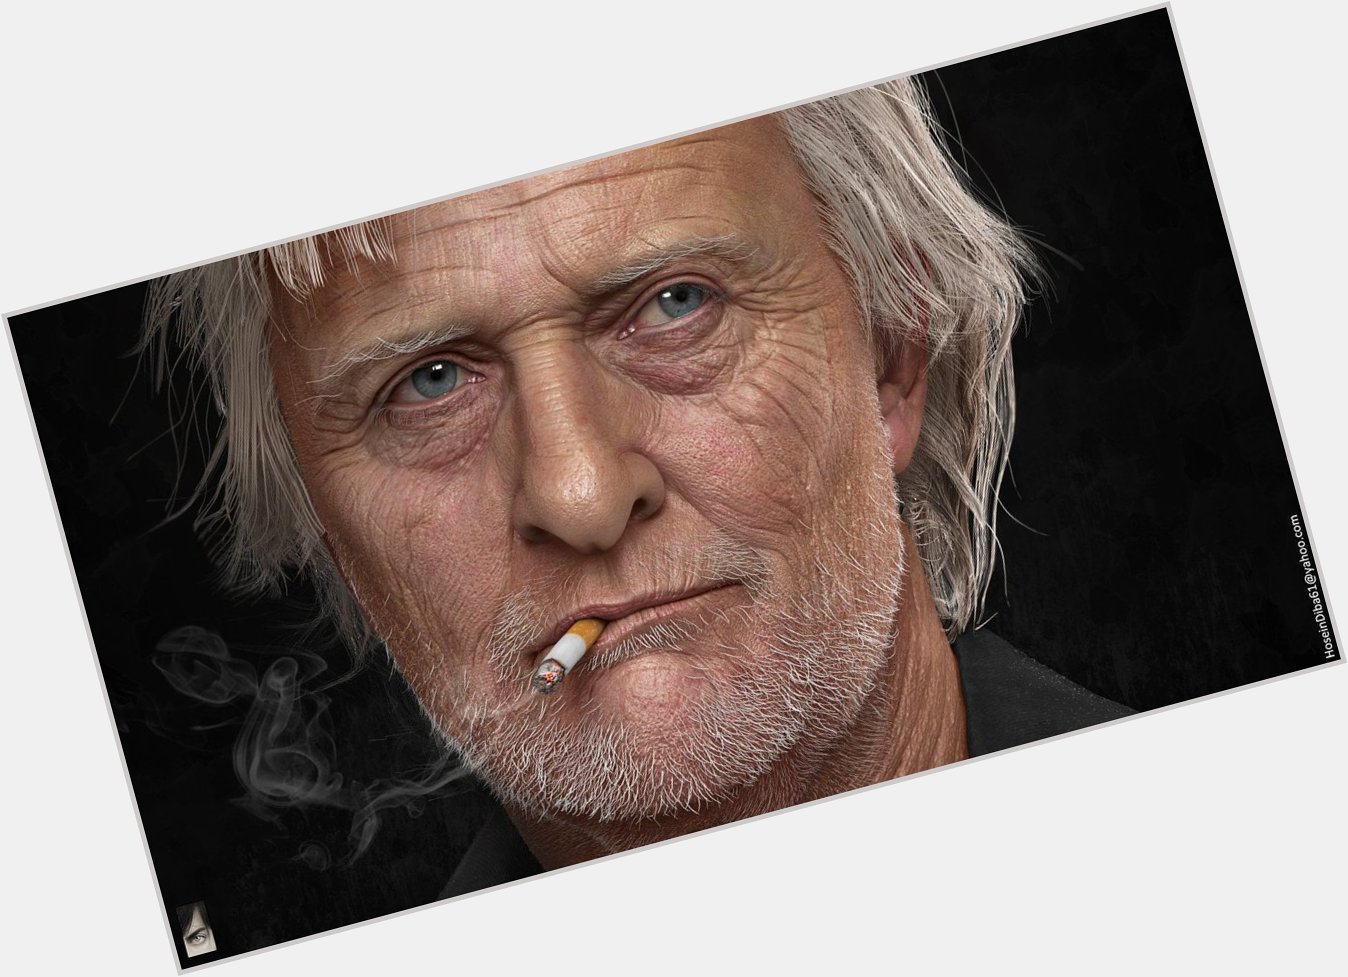 Happy 75th Birthday Rutger Hauer. Weird to think we\re living in the year Bladerunner was set 